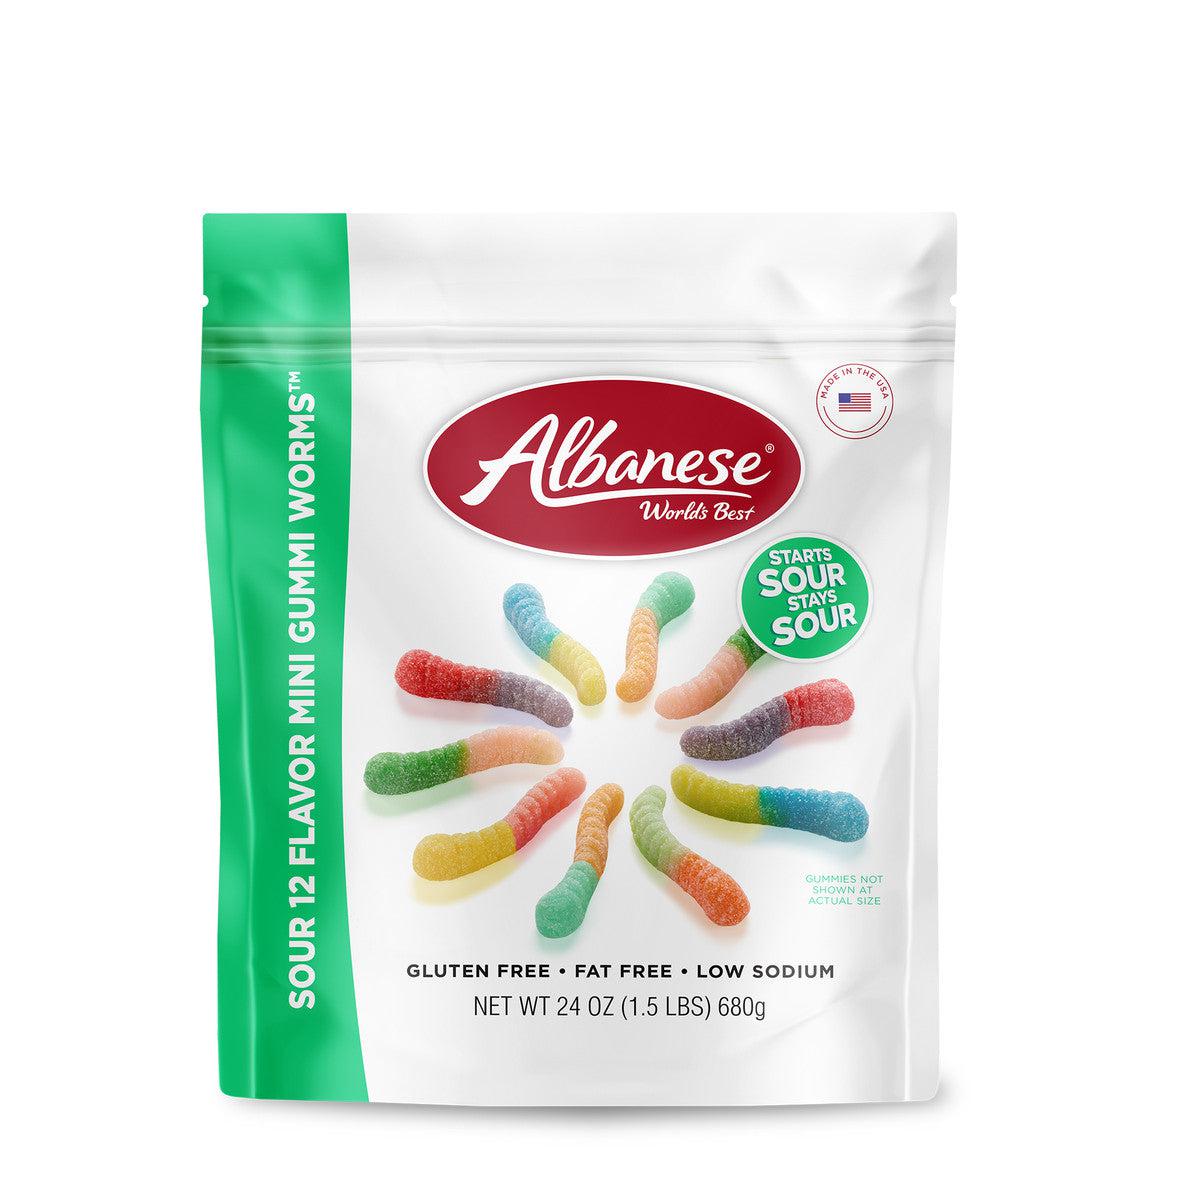 Albanese Confectionery-Sour 12 Flavor Mini Gummi Worms 24 oz Share Size Bag-53467-Legacy Toys